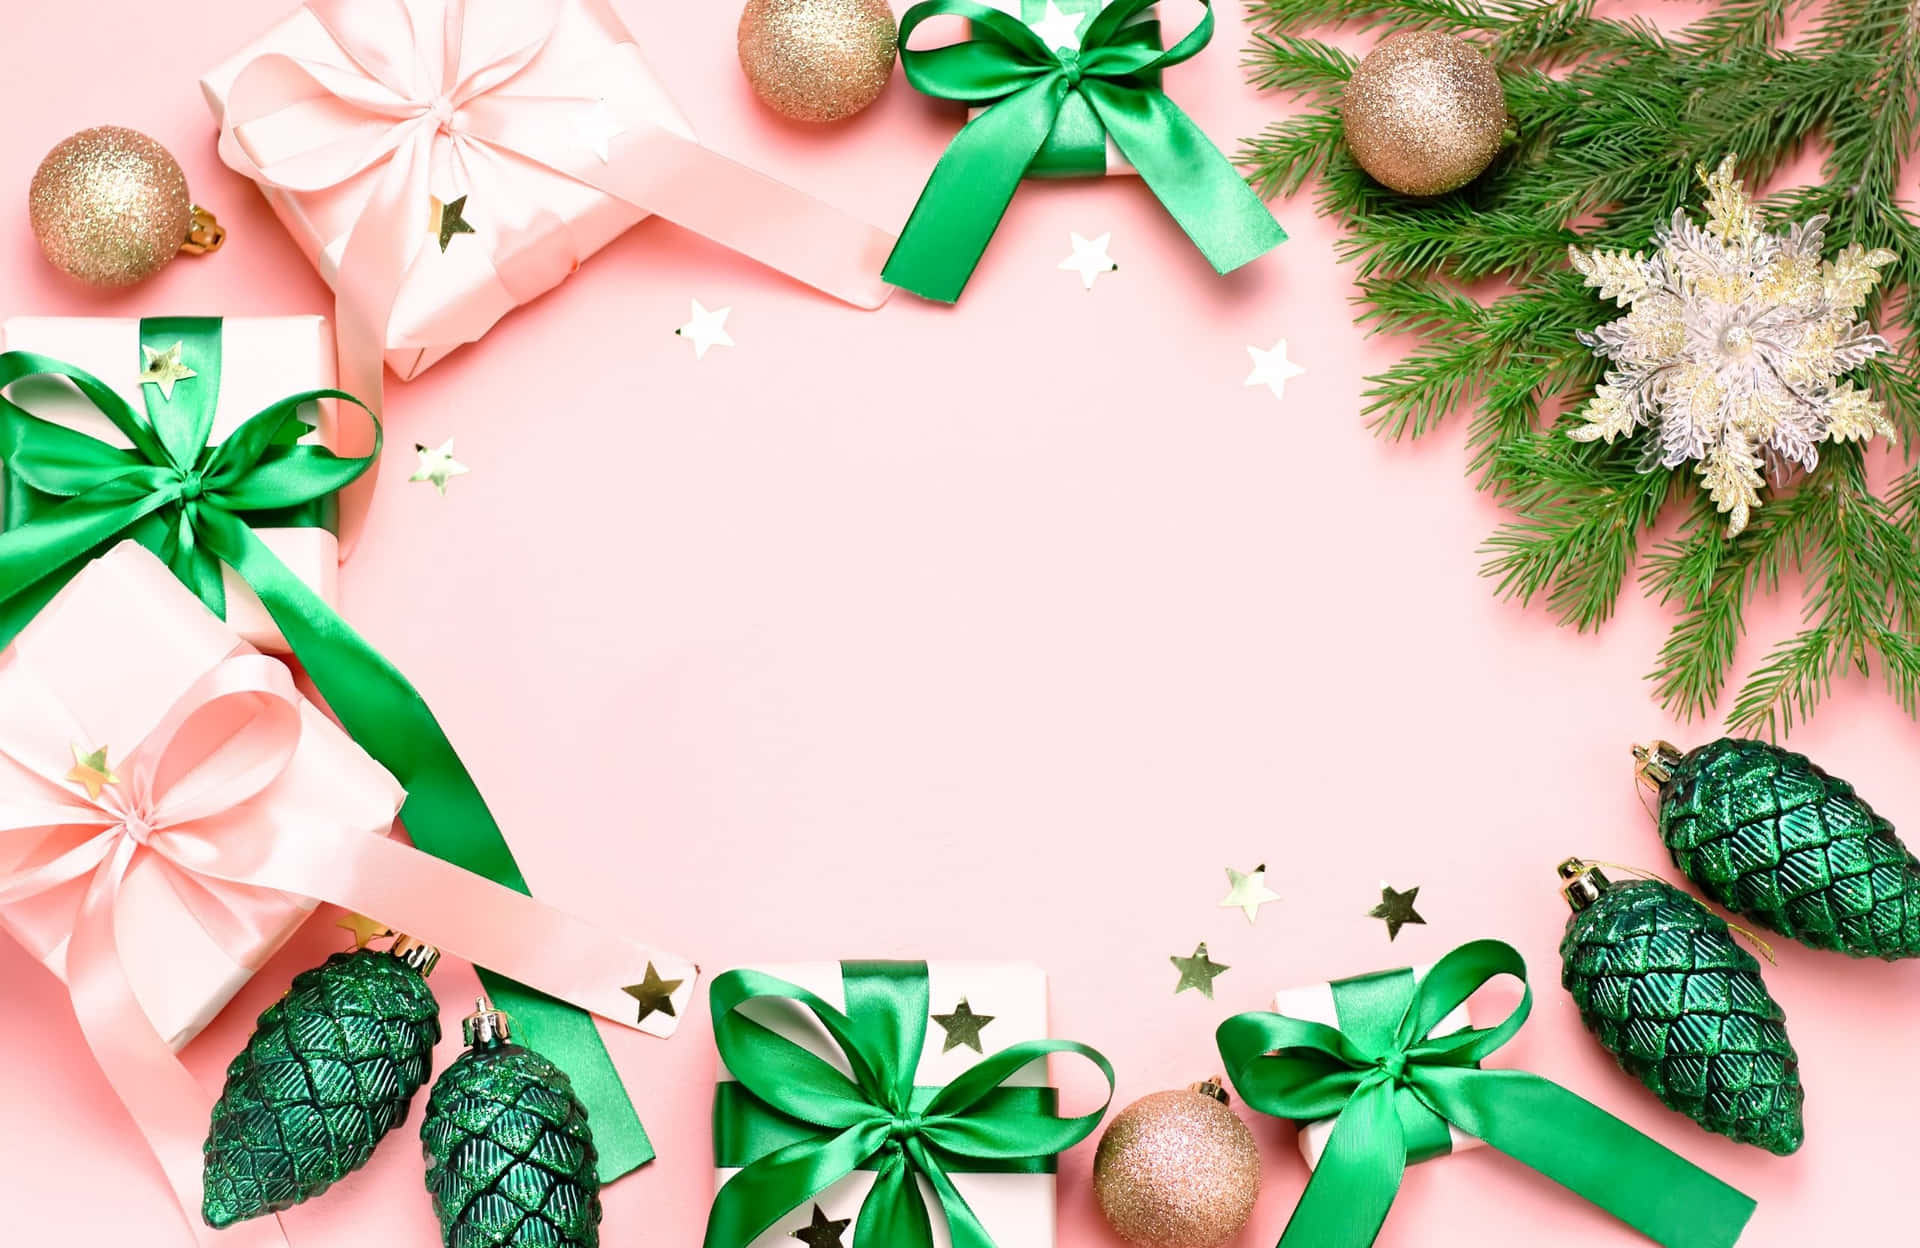 Christmas Presents On Pink Background With Green Ribbons